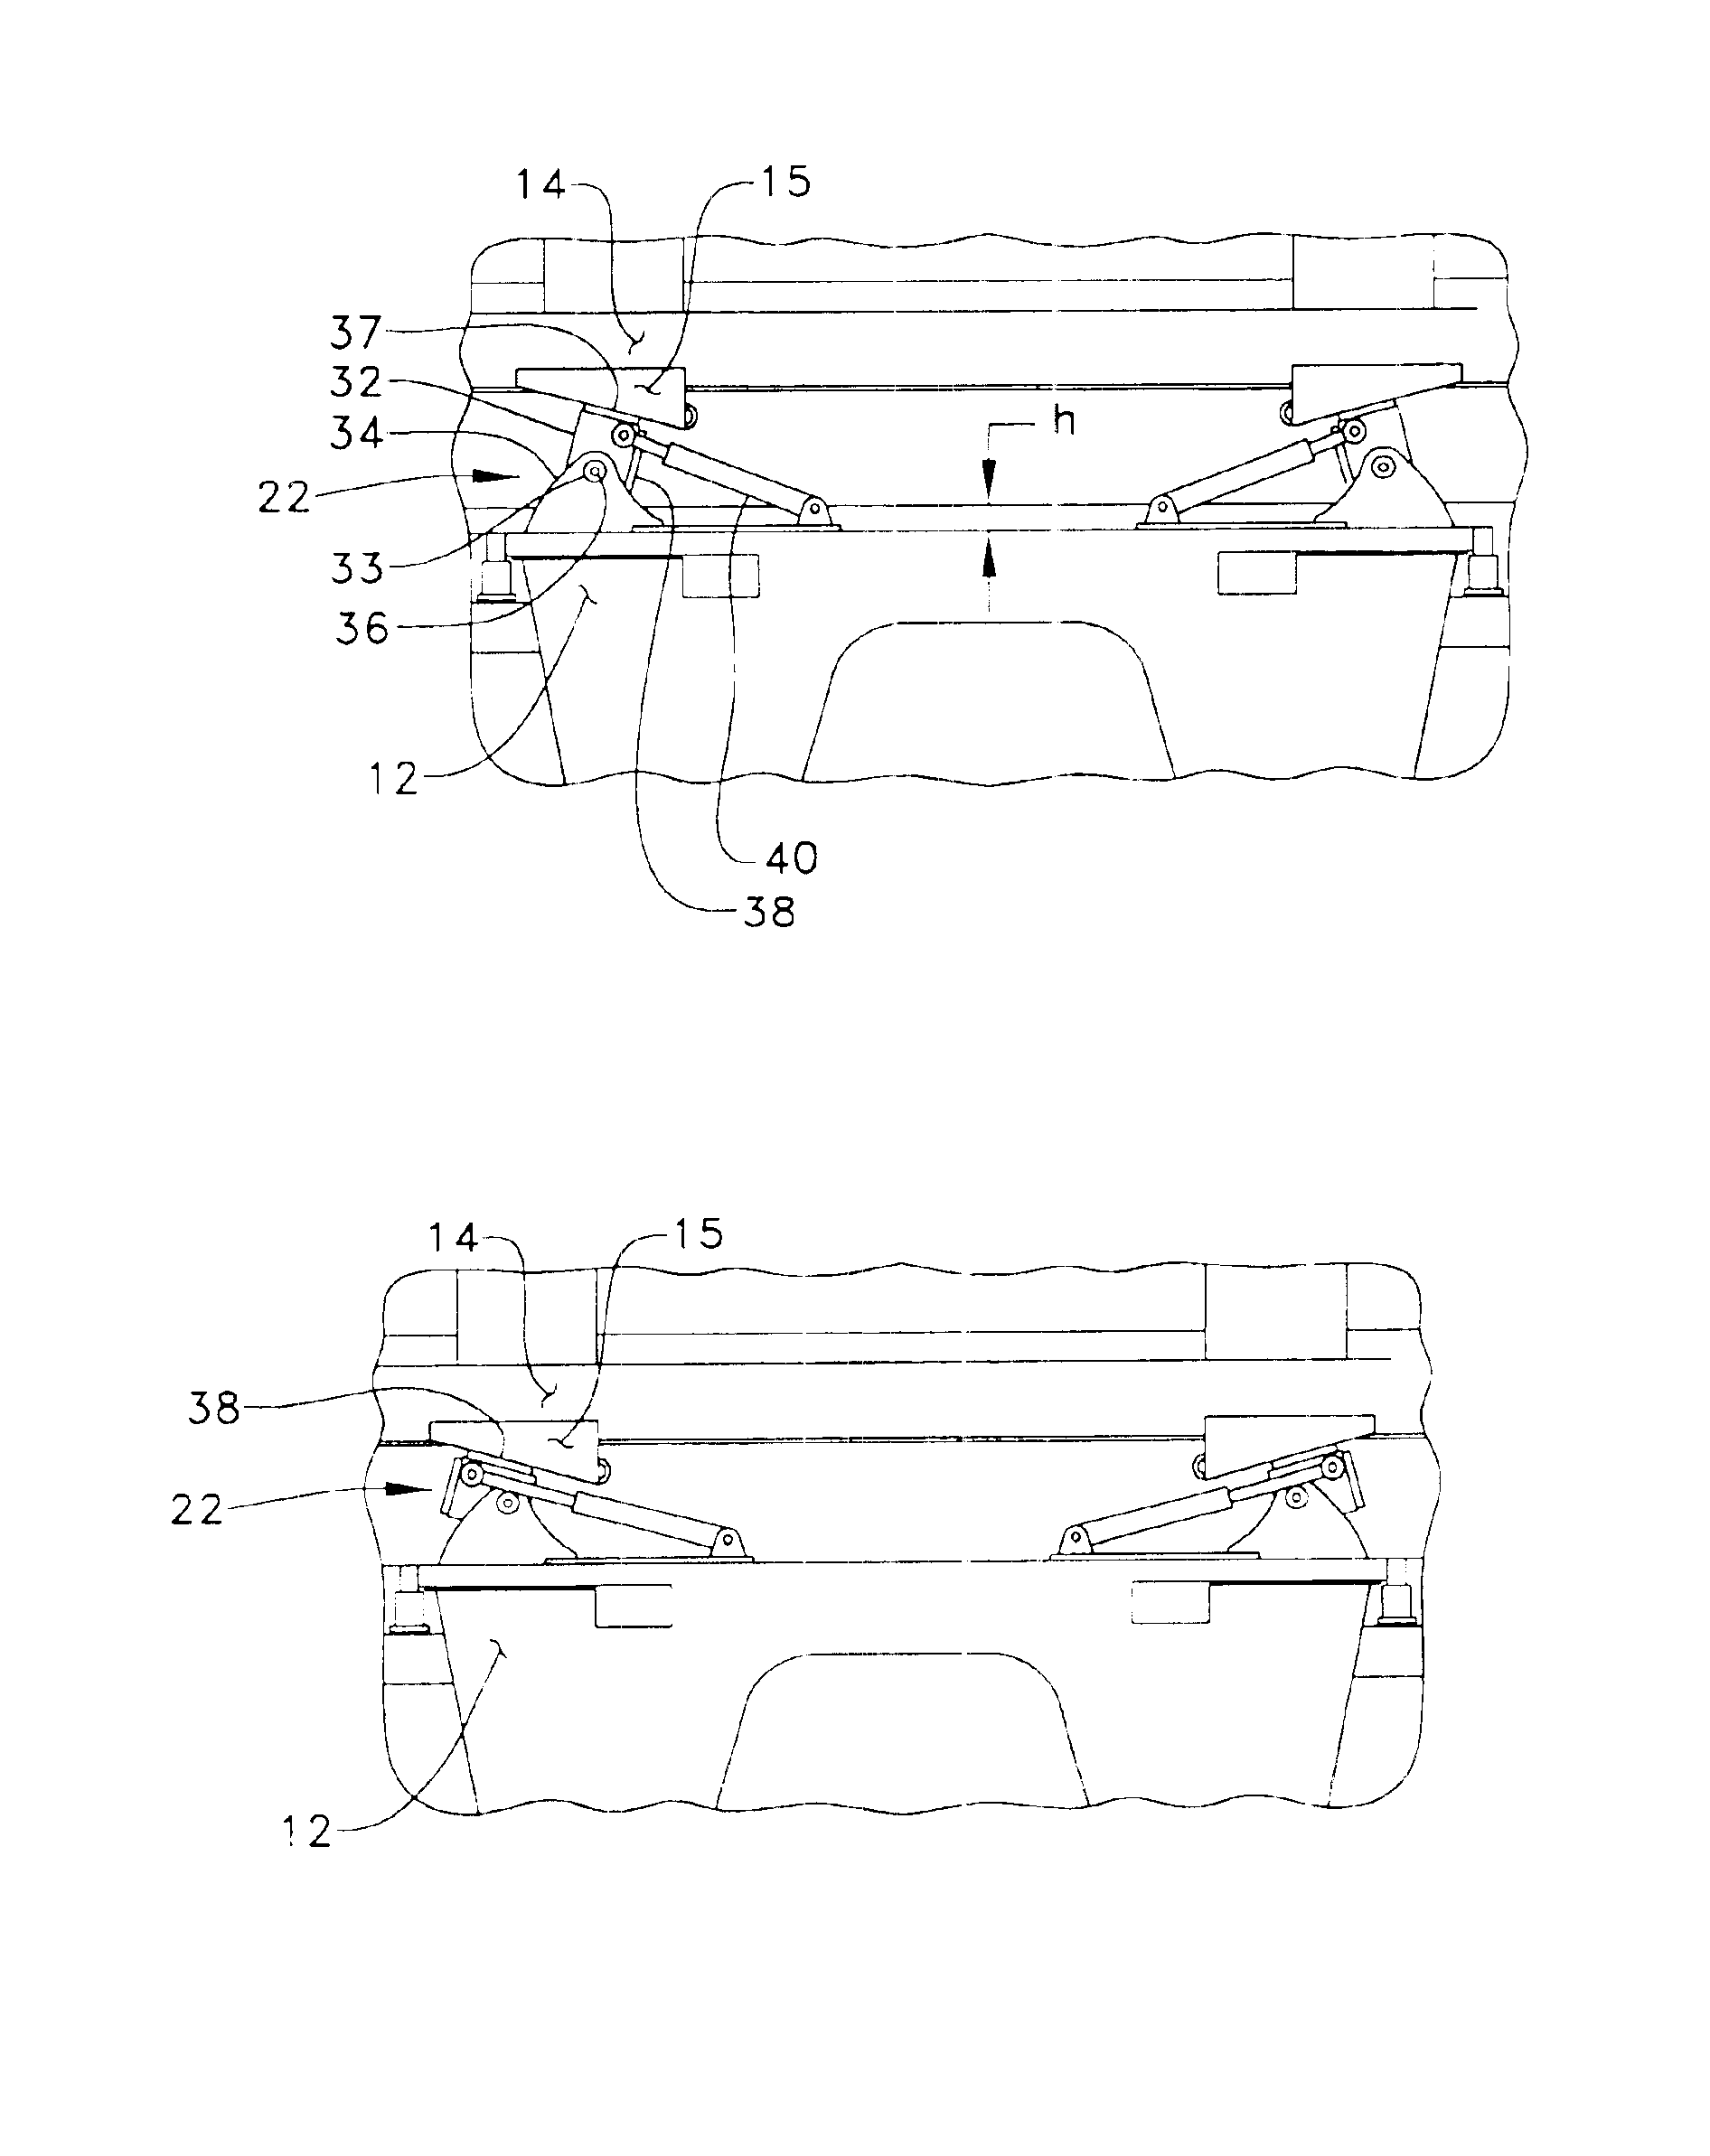 Dump truck with payload weight measuring system and method of using same